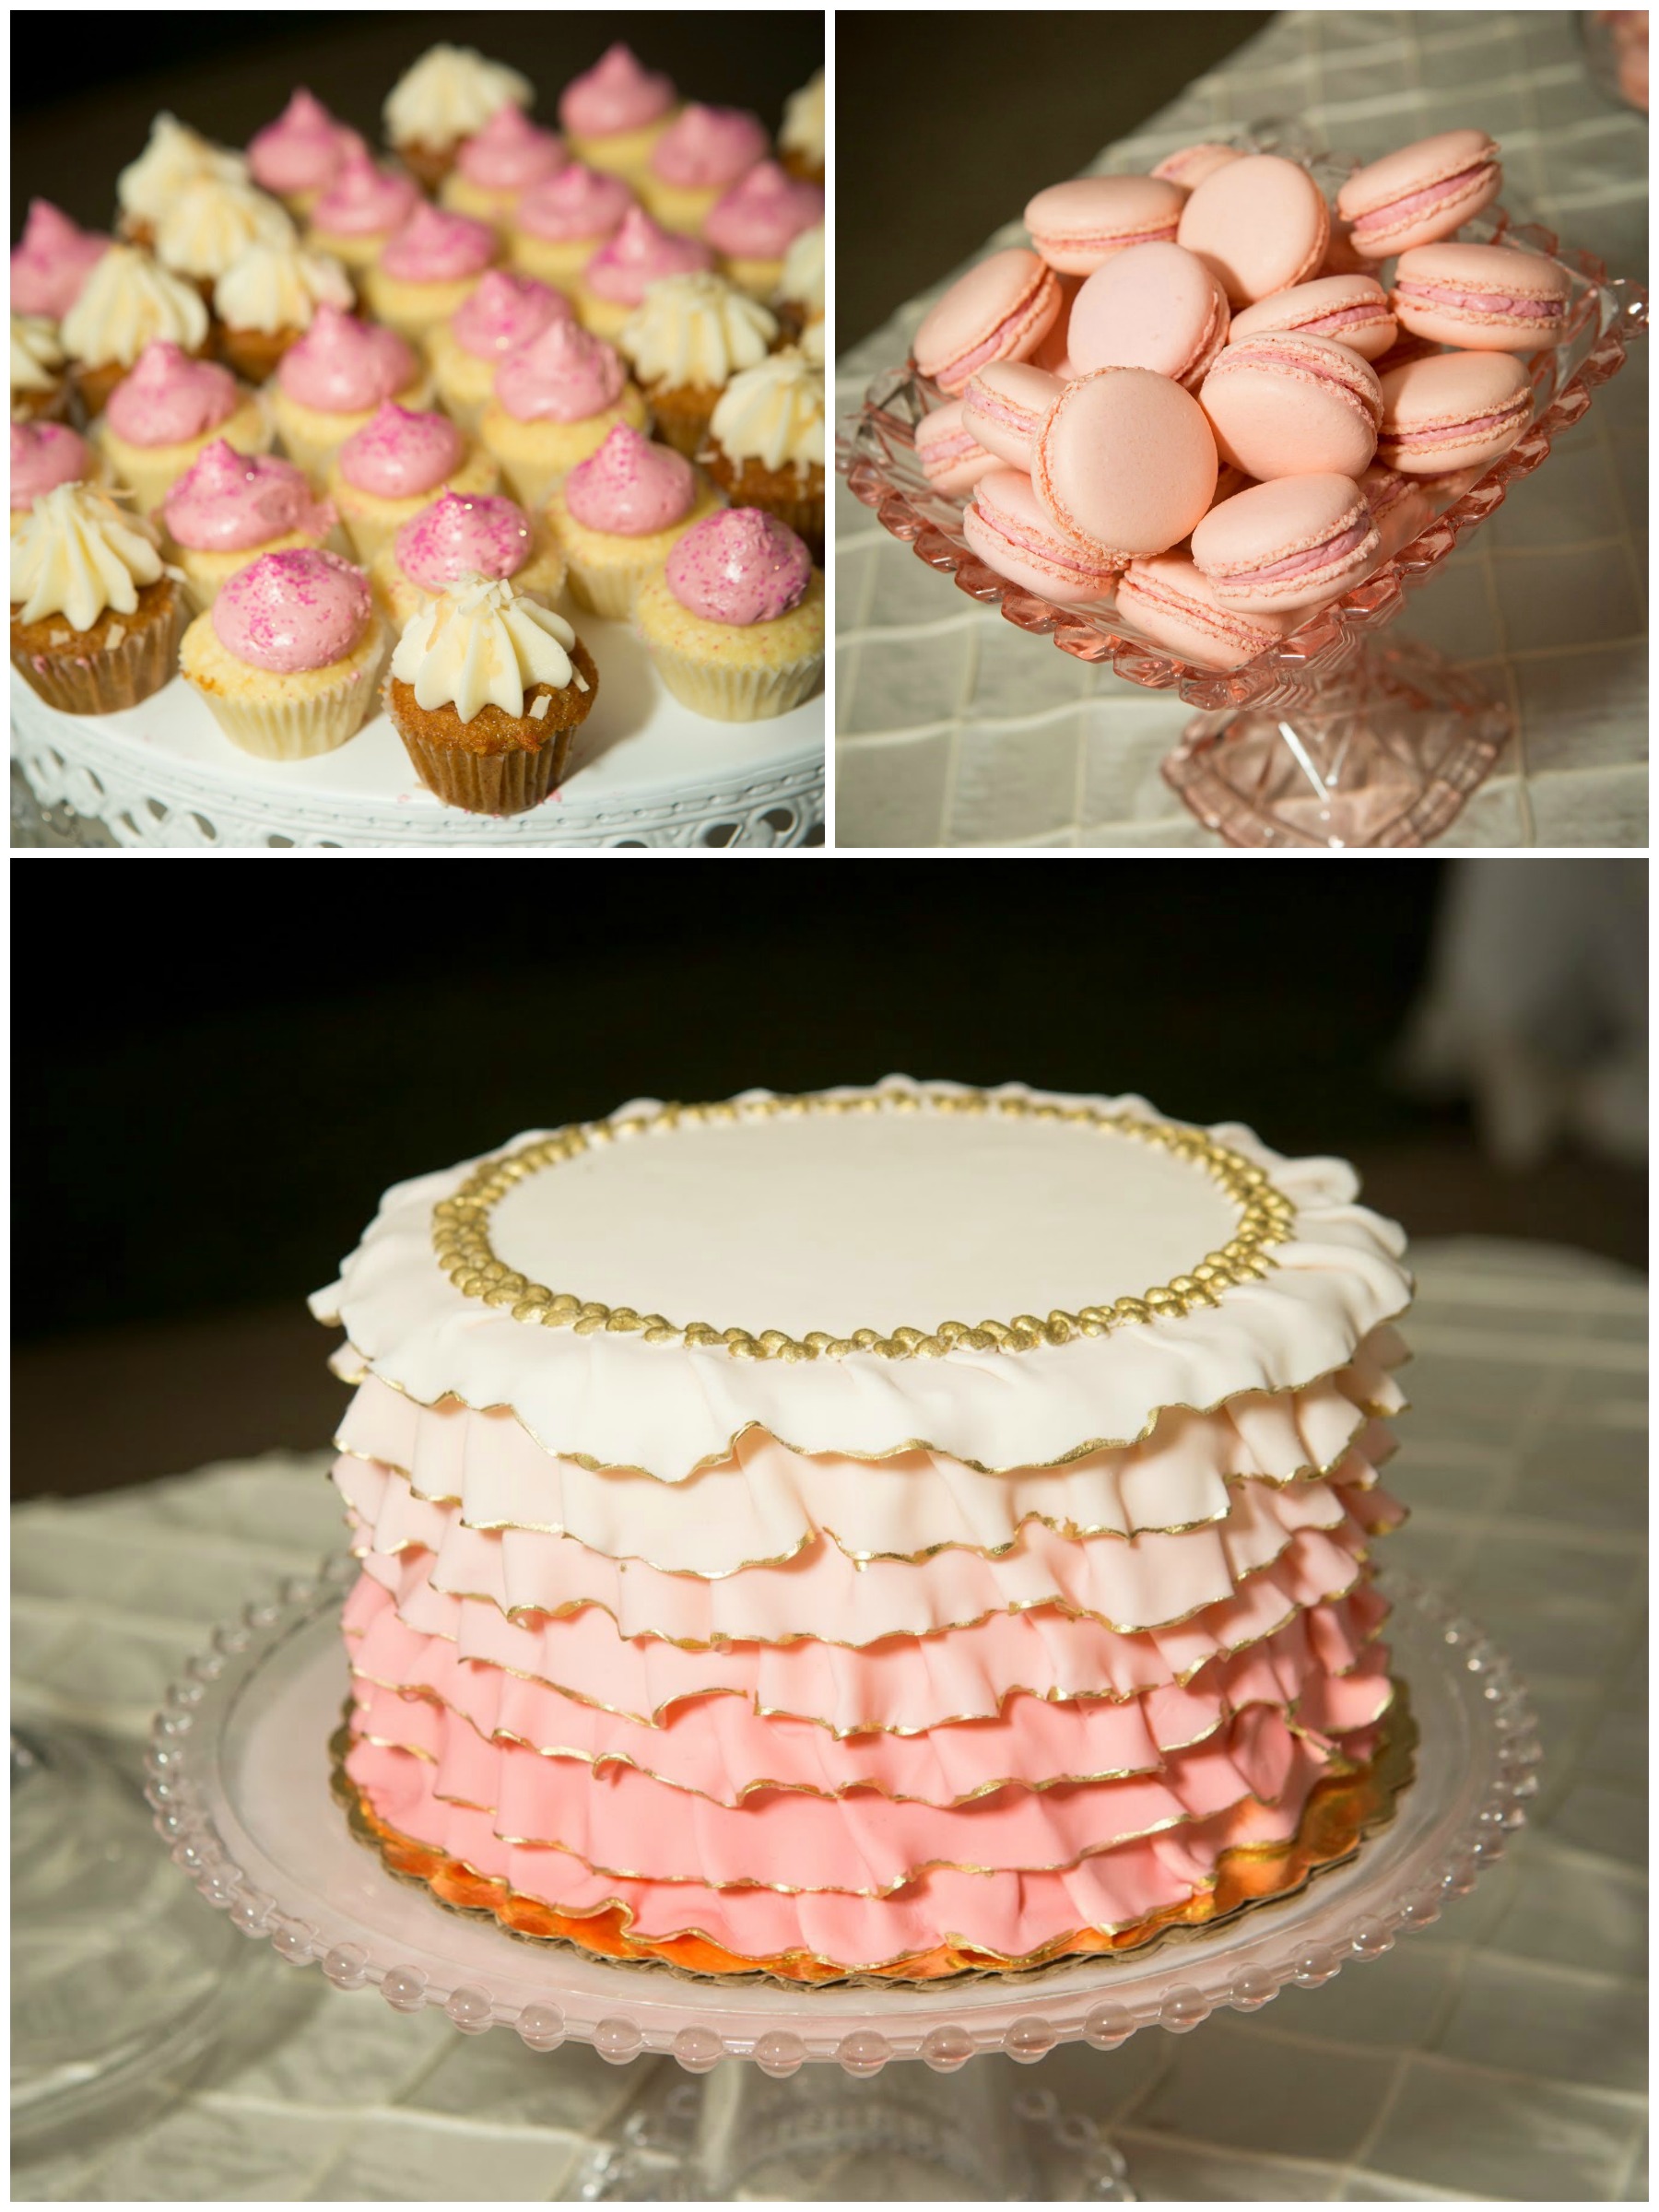 Pink and white ombre ruffled cake